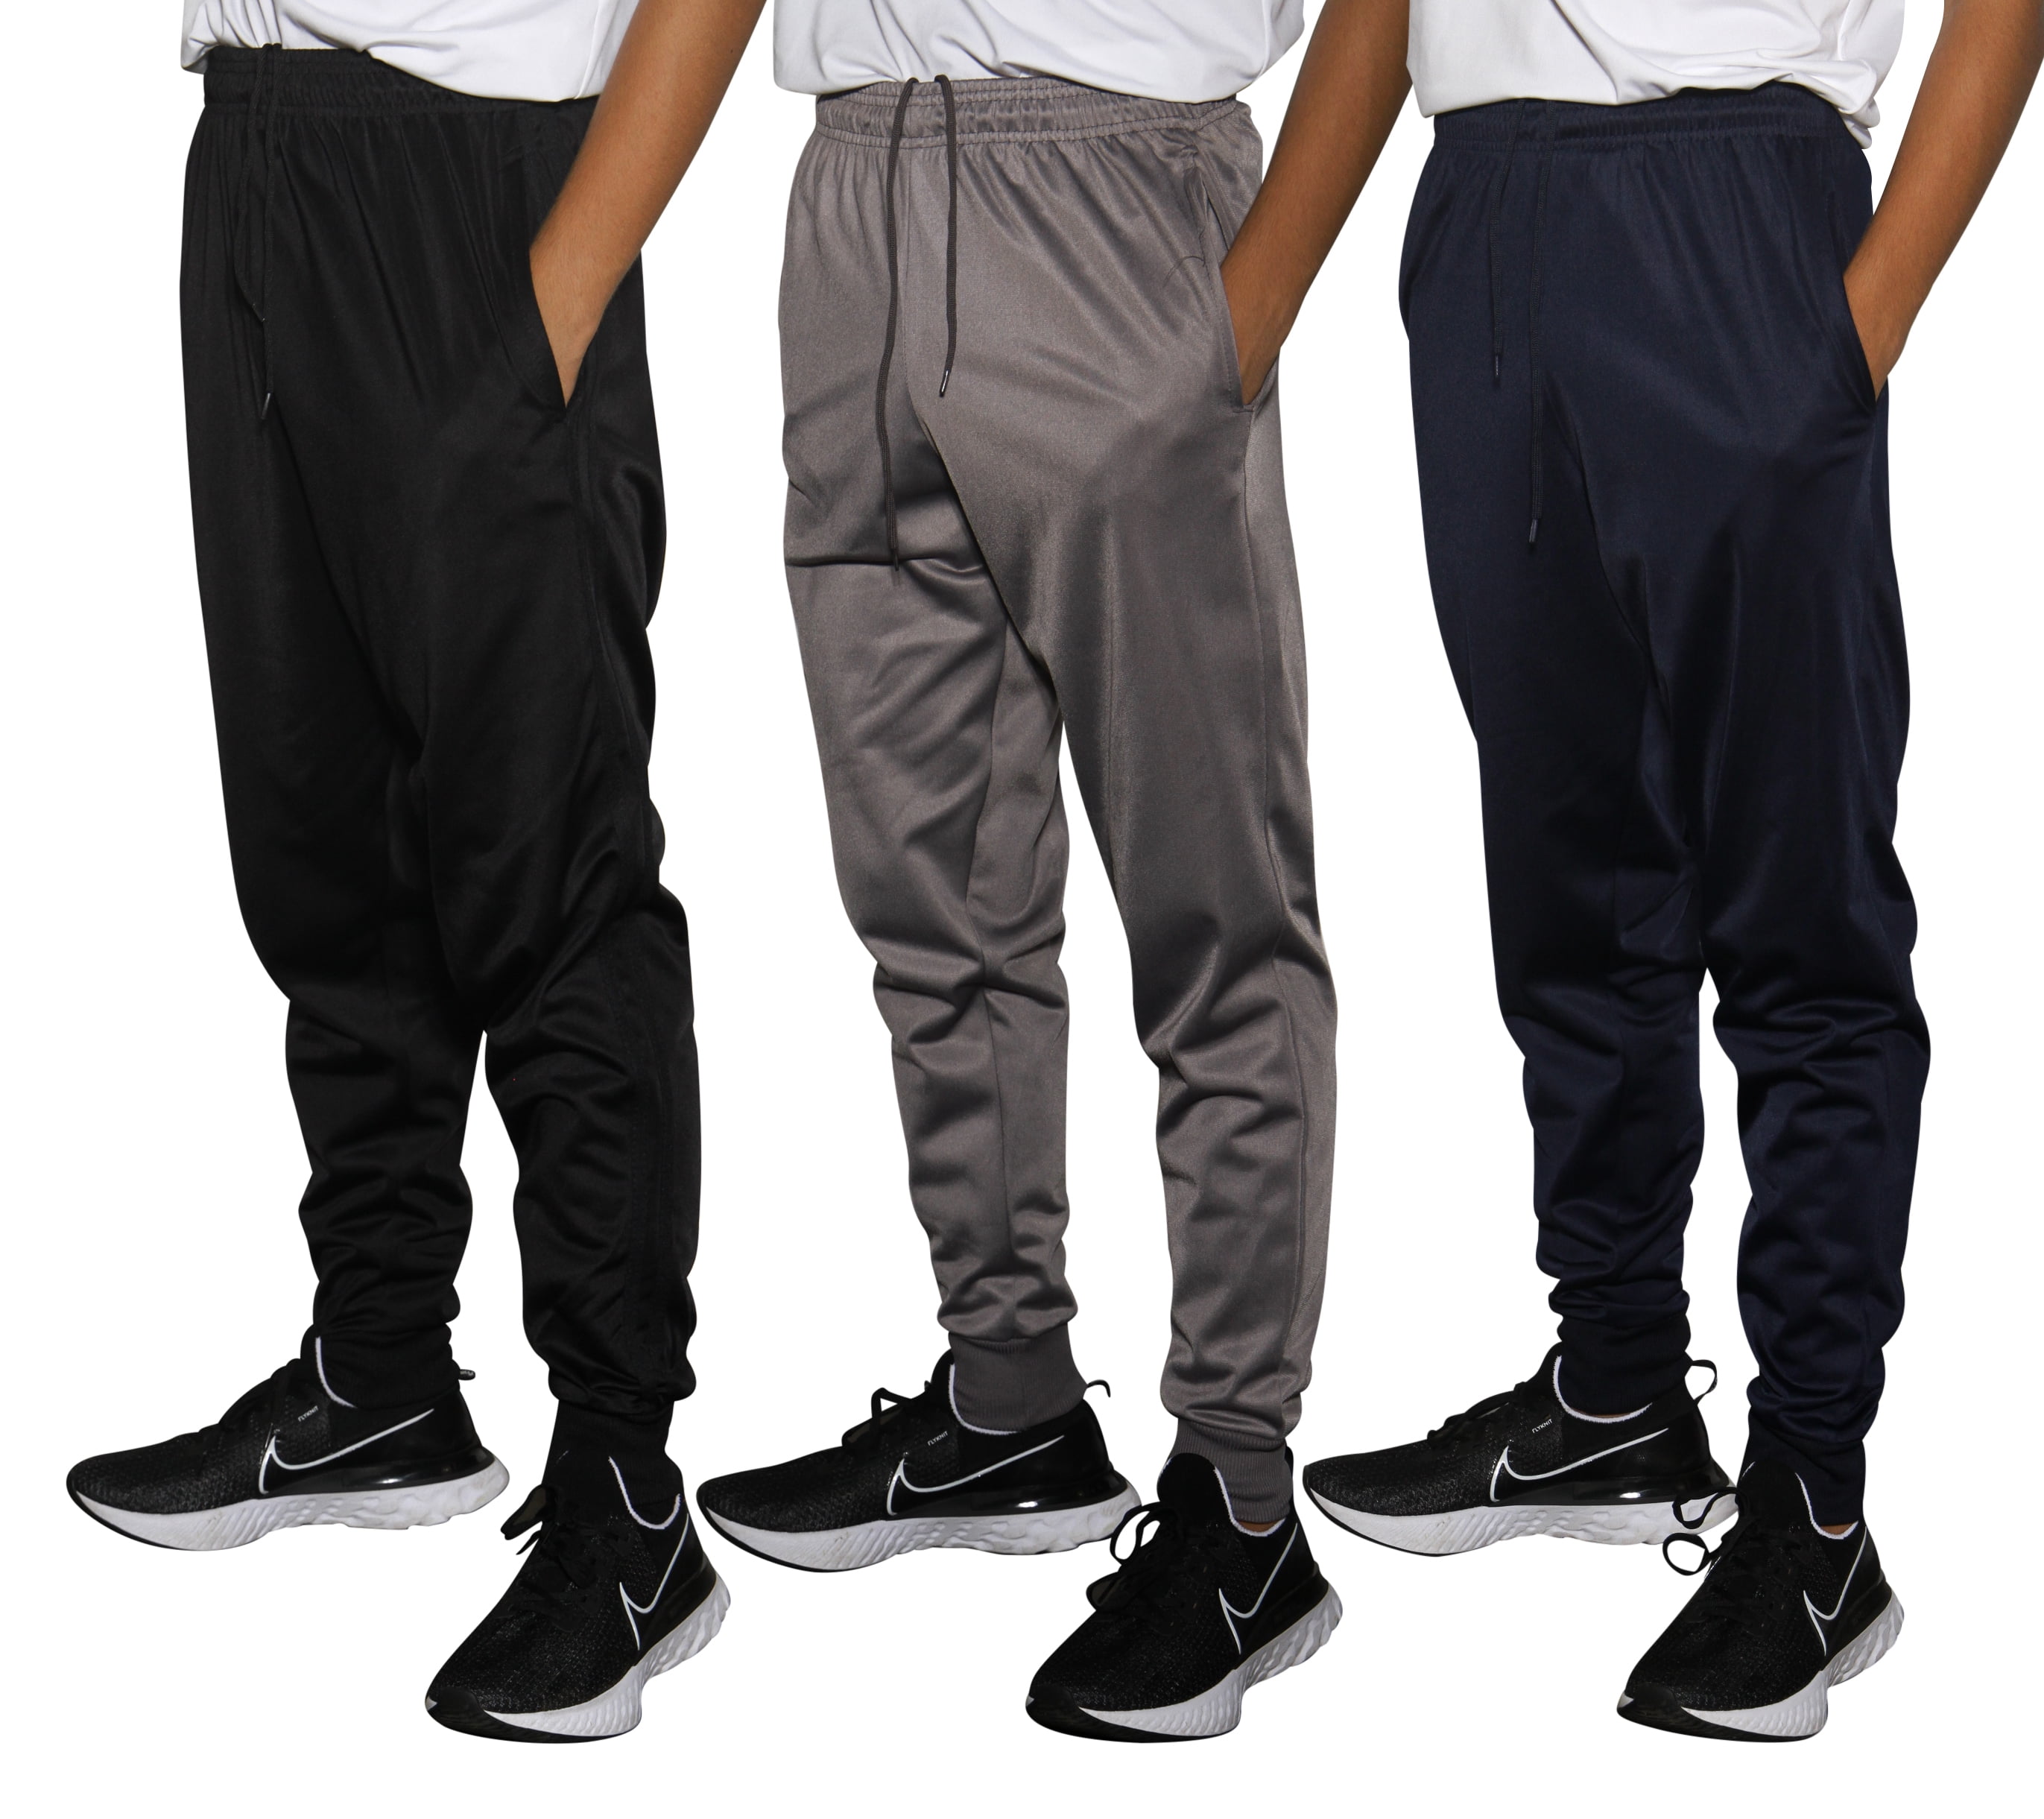 Champion Youth Boy's French Terry Jogger Lounge Sweatpants with Pockets Kids Clothes 